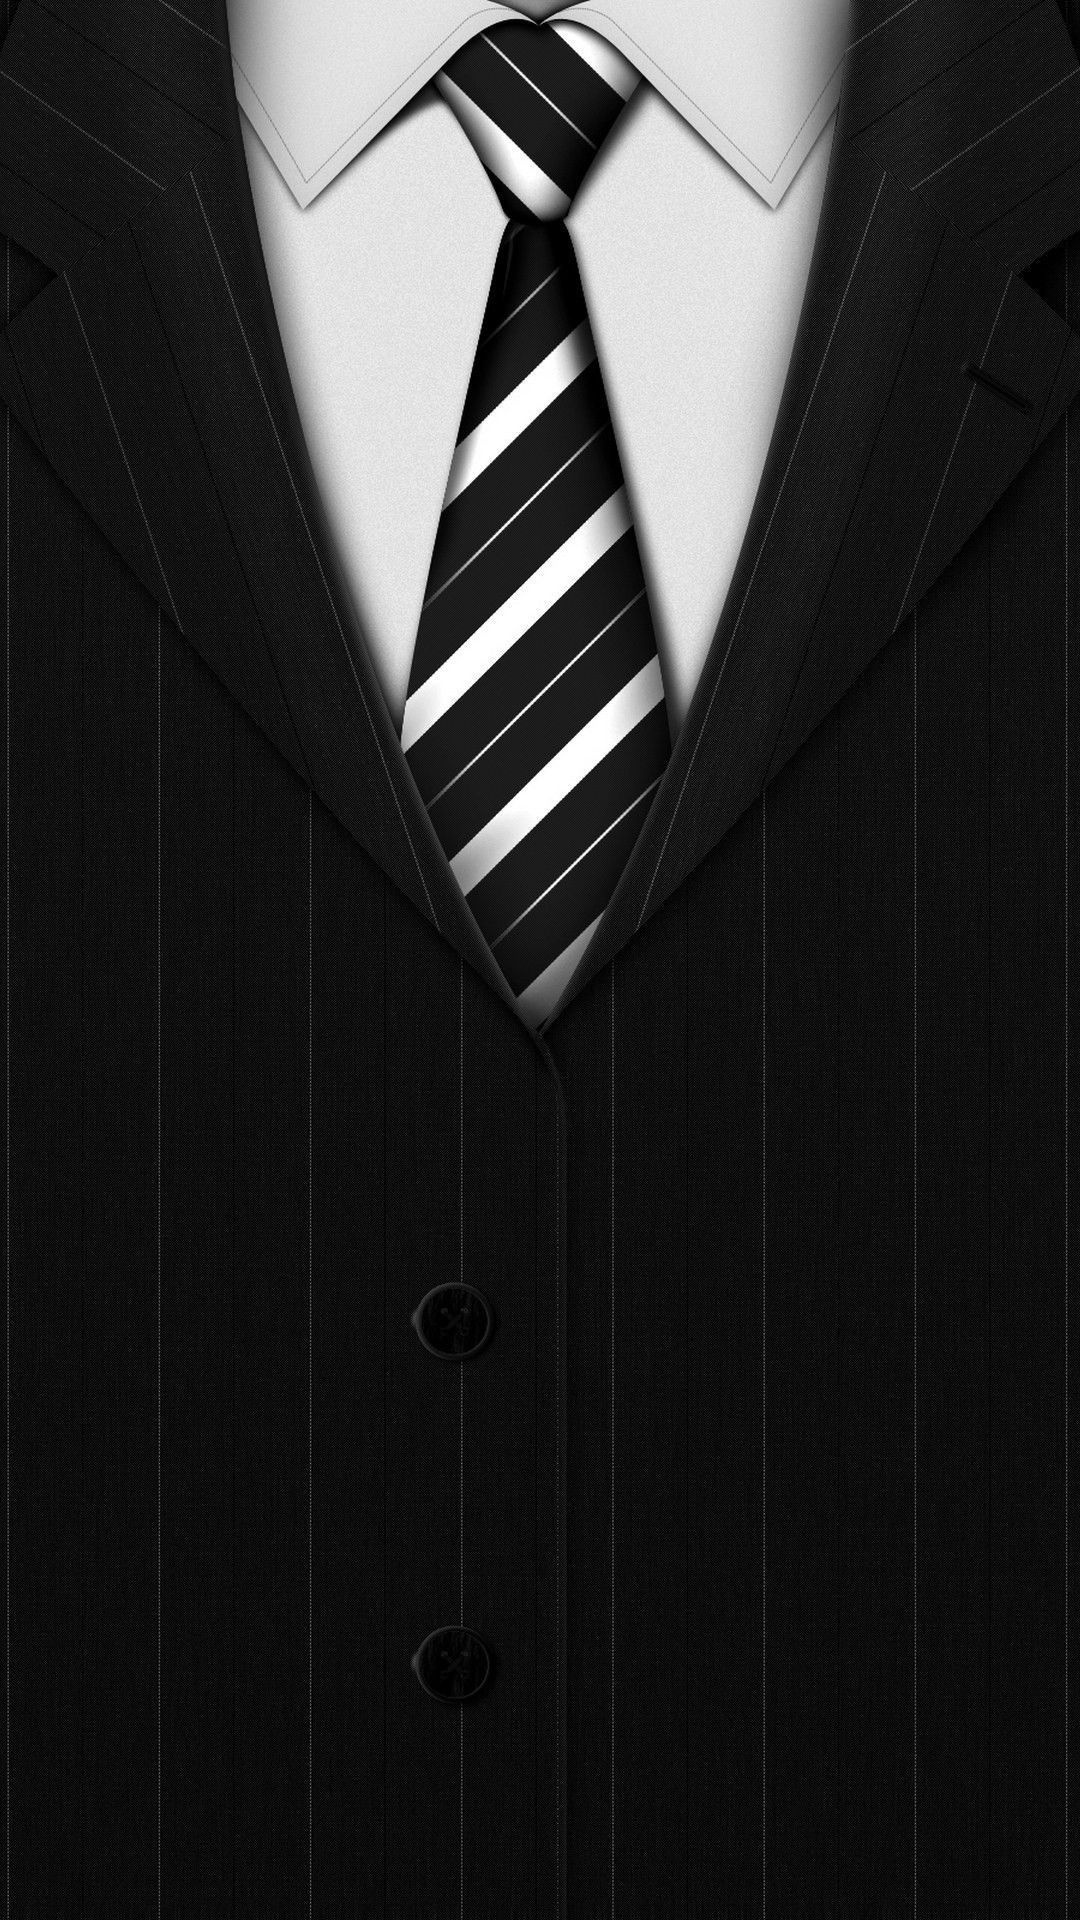 Tie, Abstract black suit, iPhone 6 wallpaper, Cool wallpapers for phones, 1080x1920 Full HD Phone